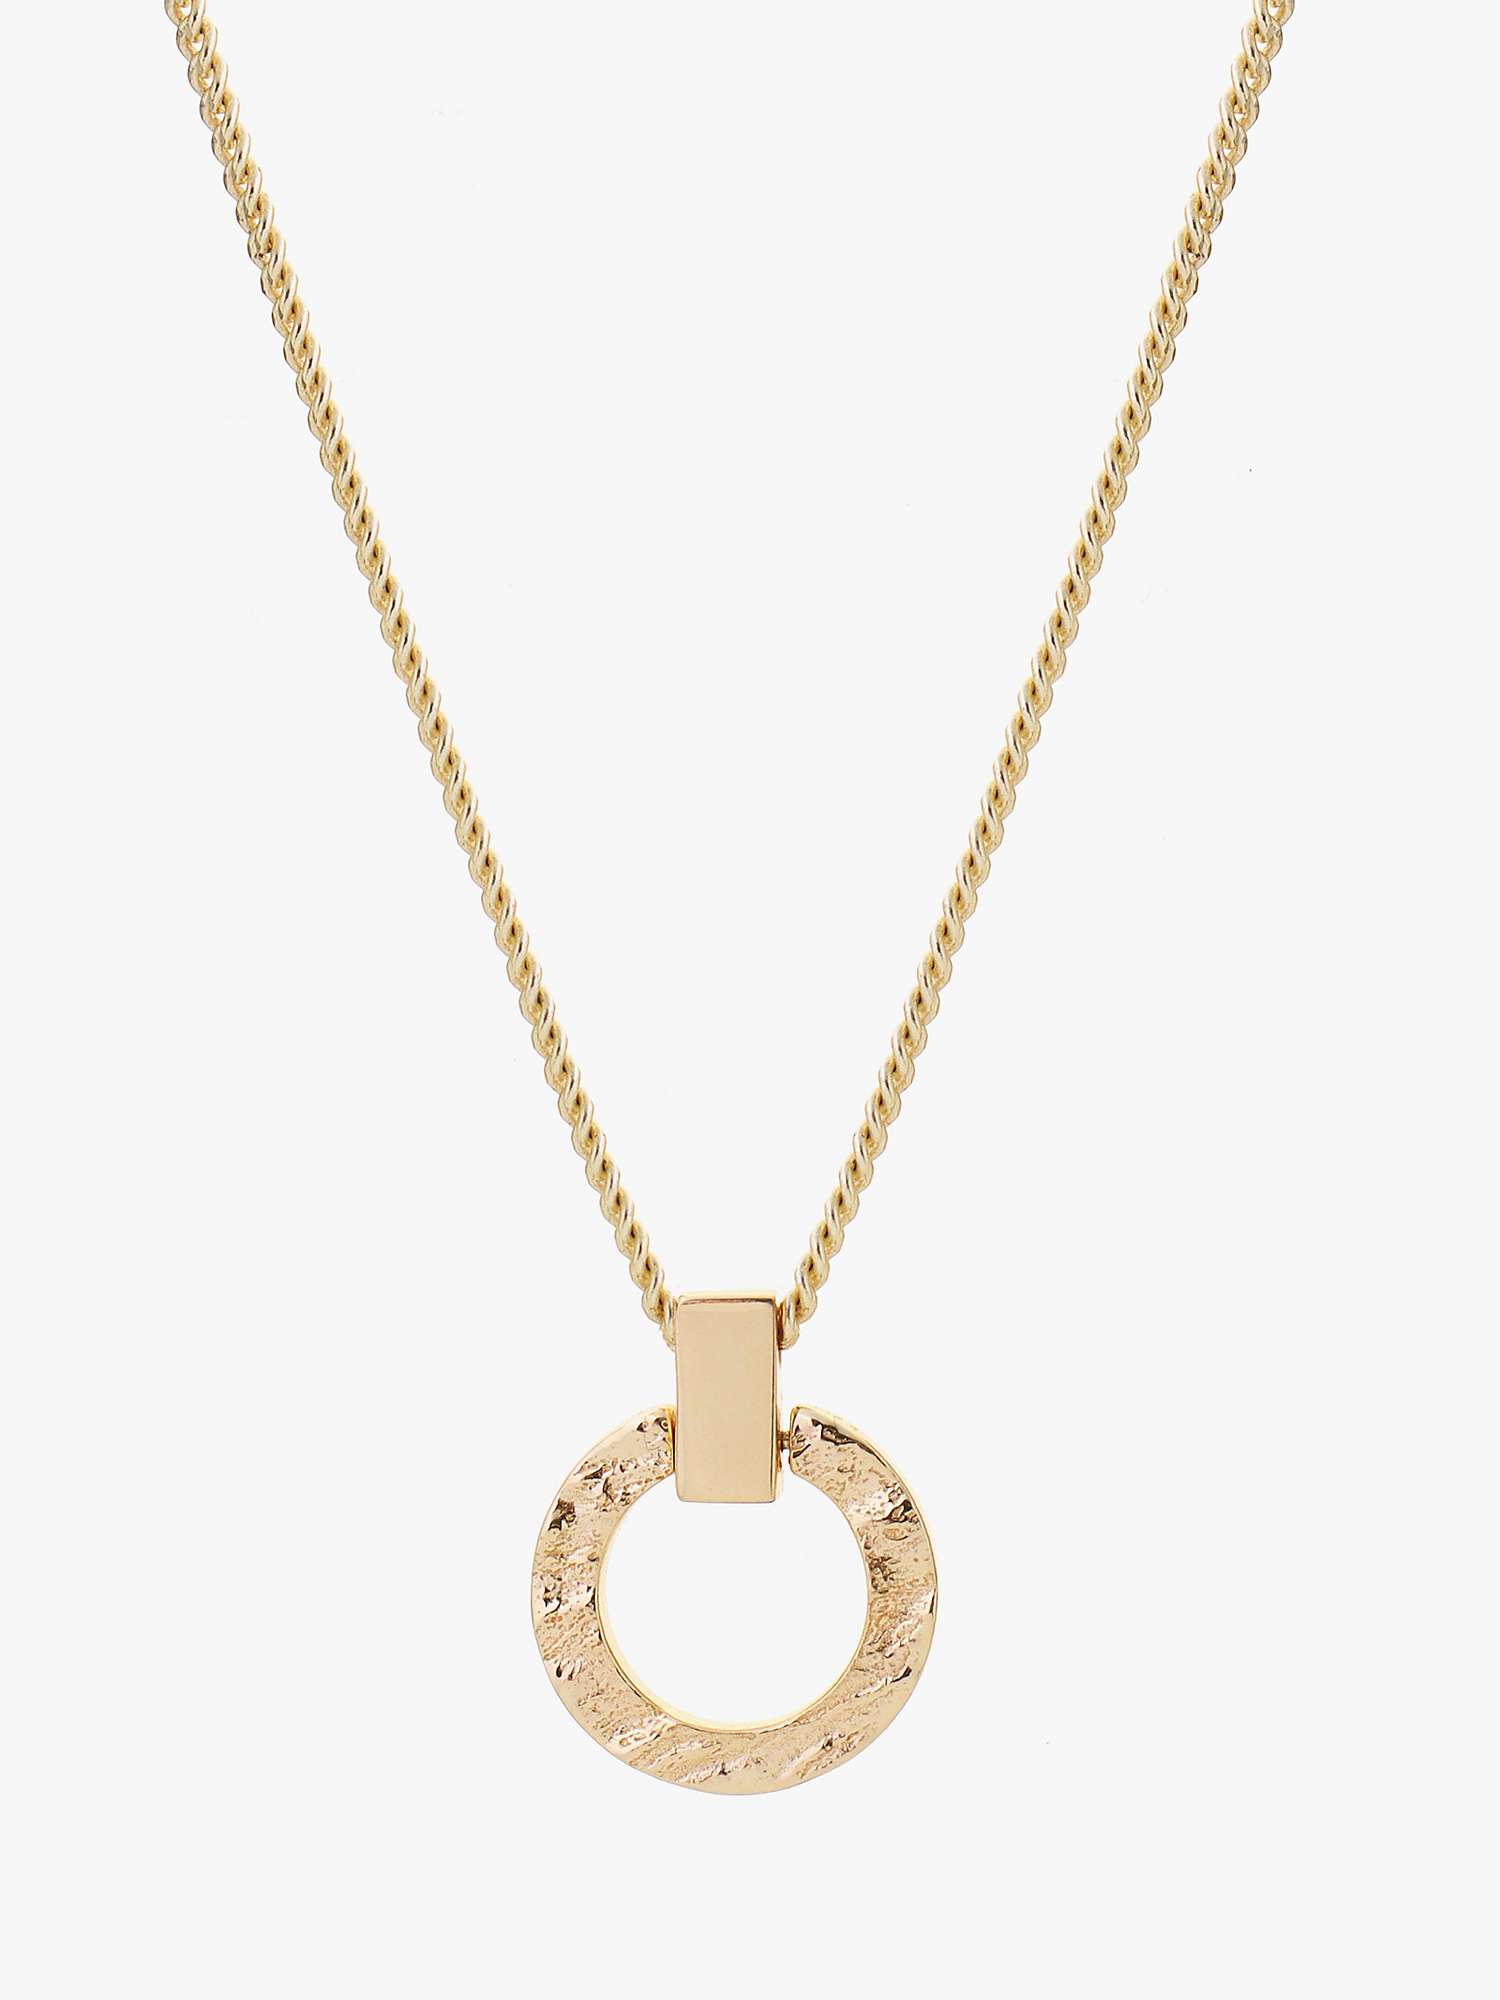 Buy Tutti & Co Palm Collection Textured Circle Pendant Necklace Online at johnlewis.com